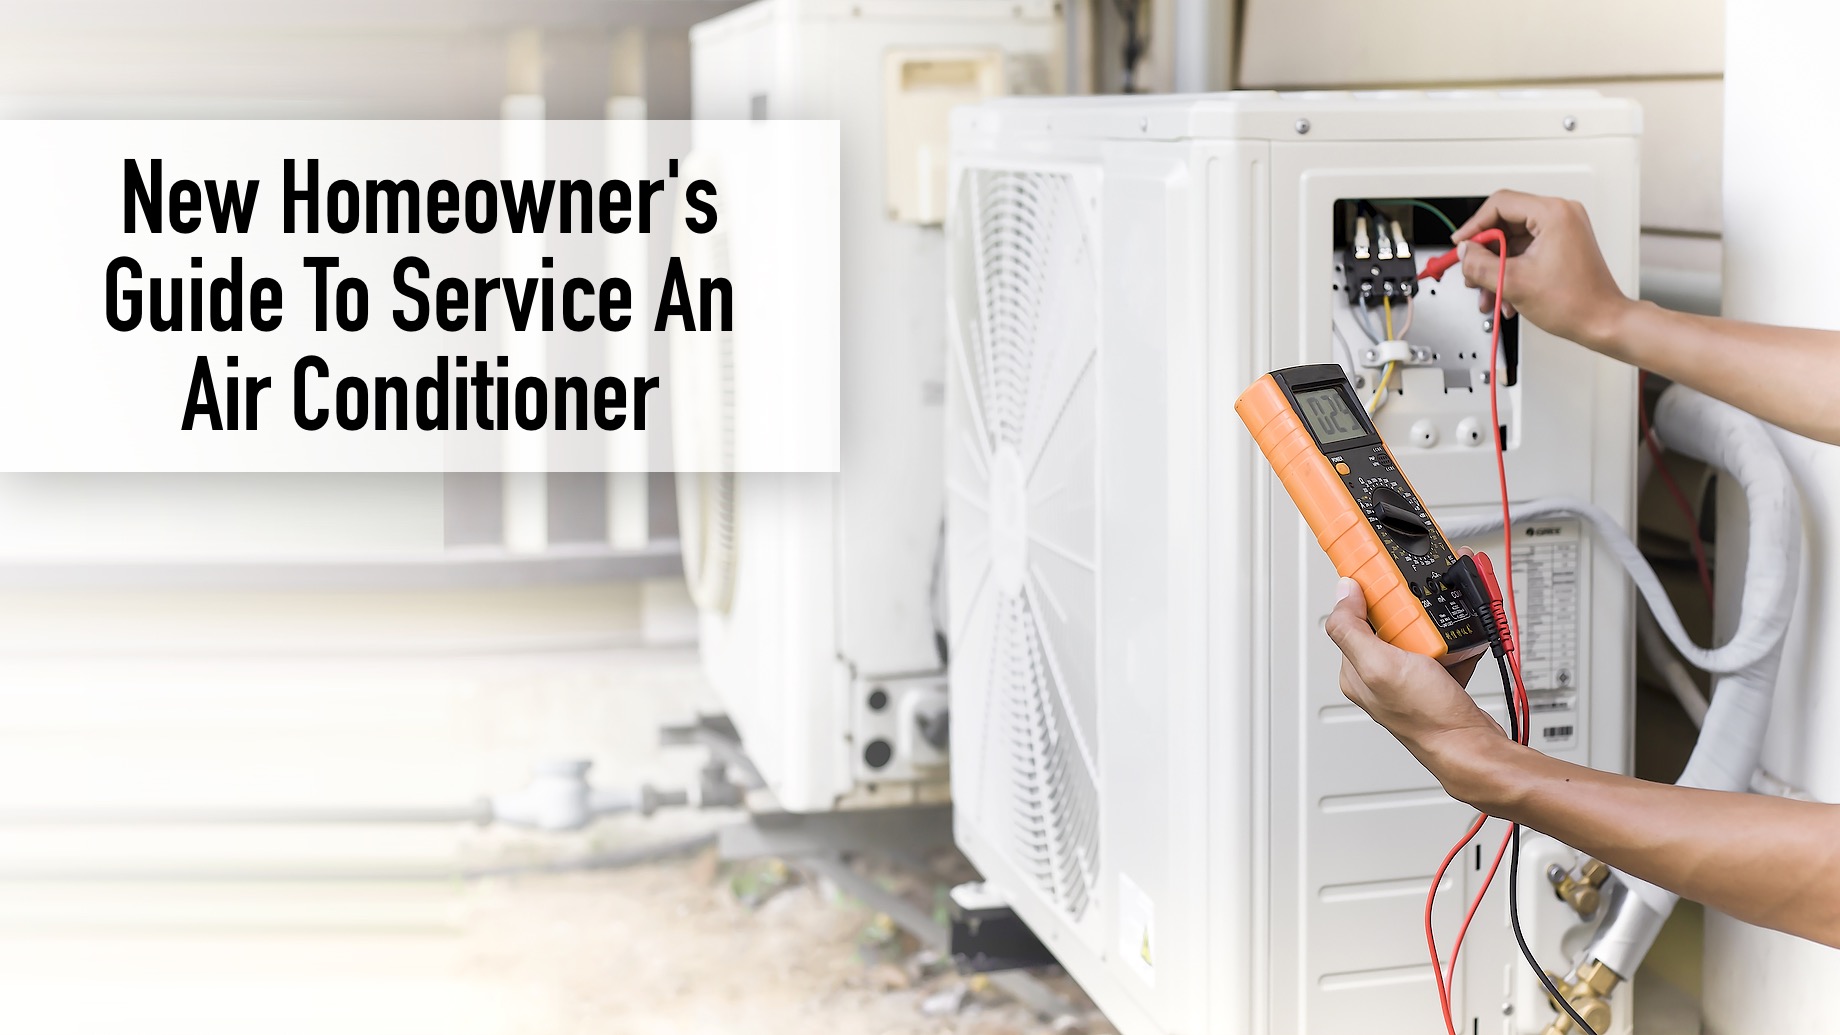 New Homeowner's Guide To Service An Air Conditioner